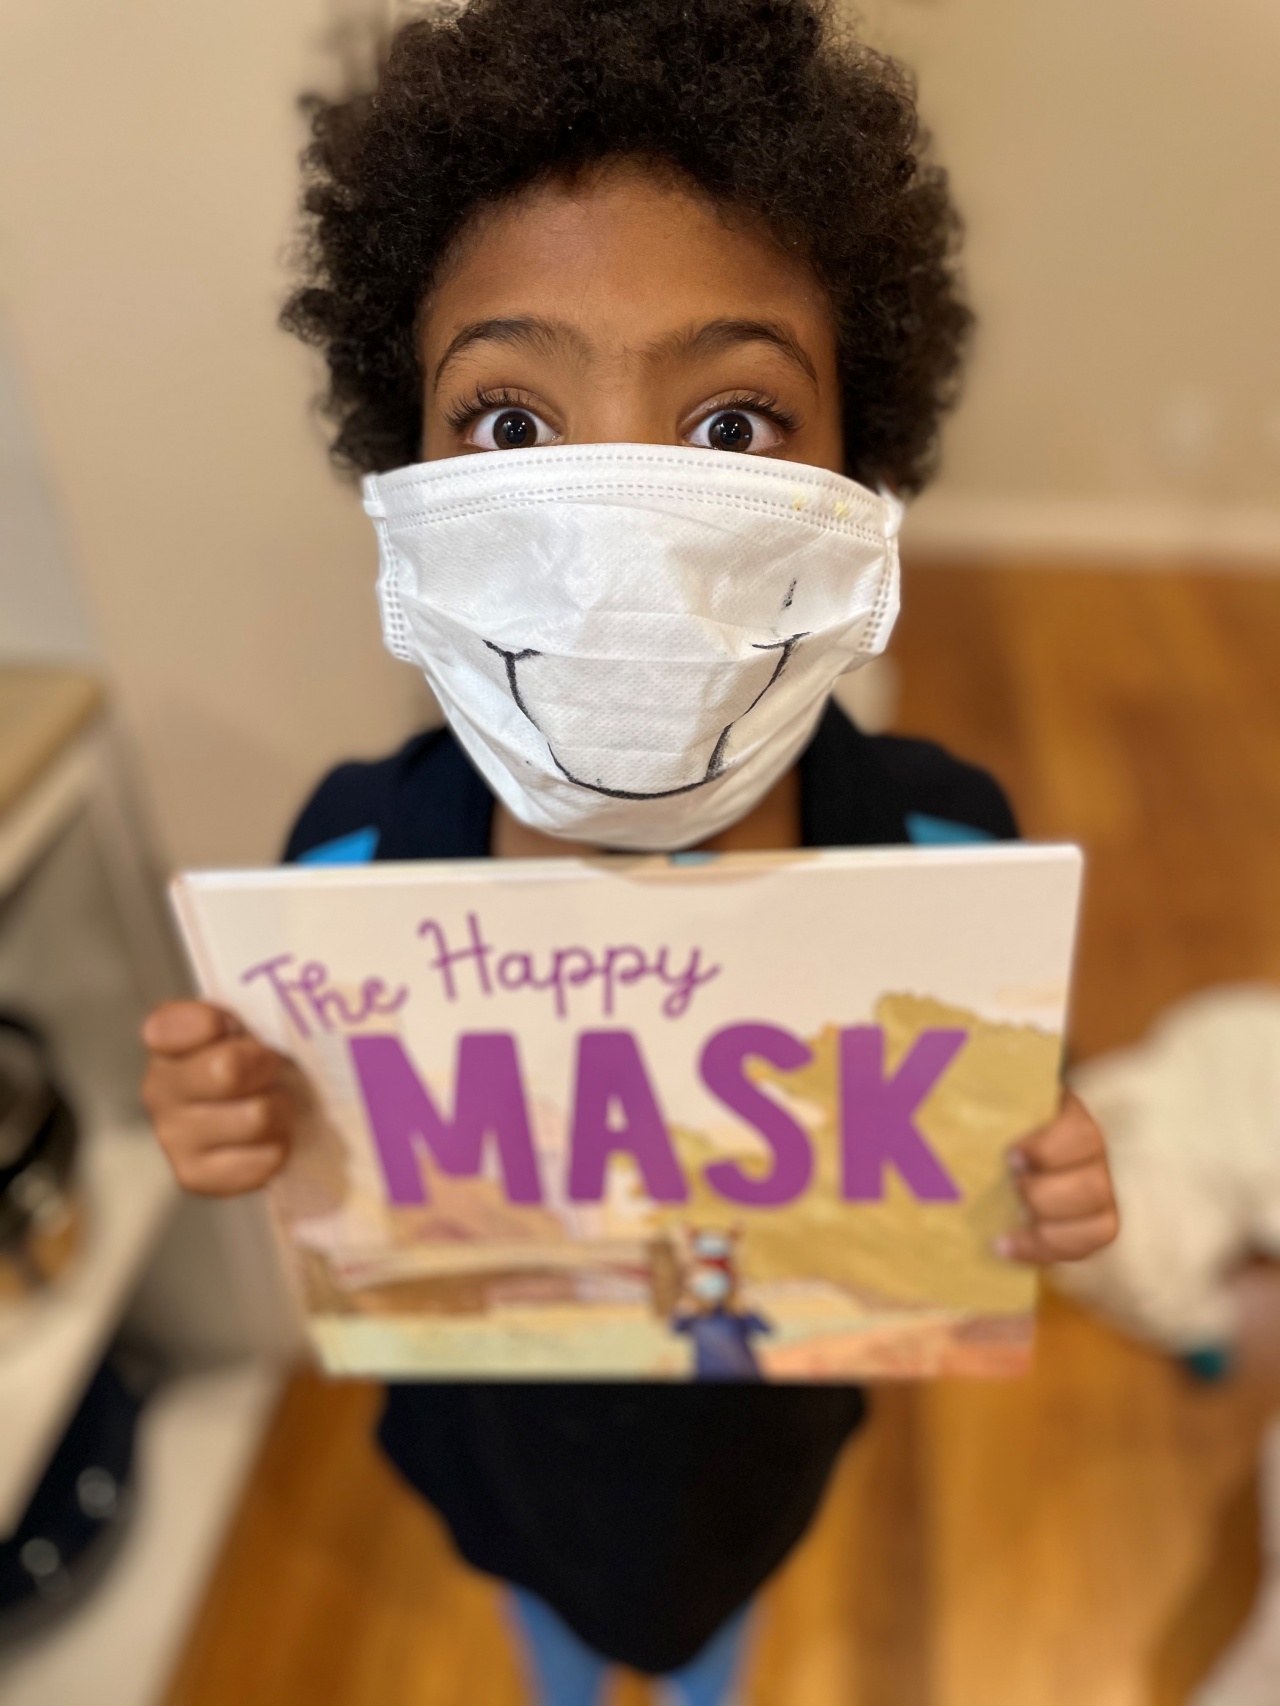 The Happy Mask